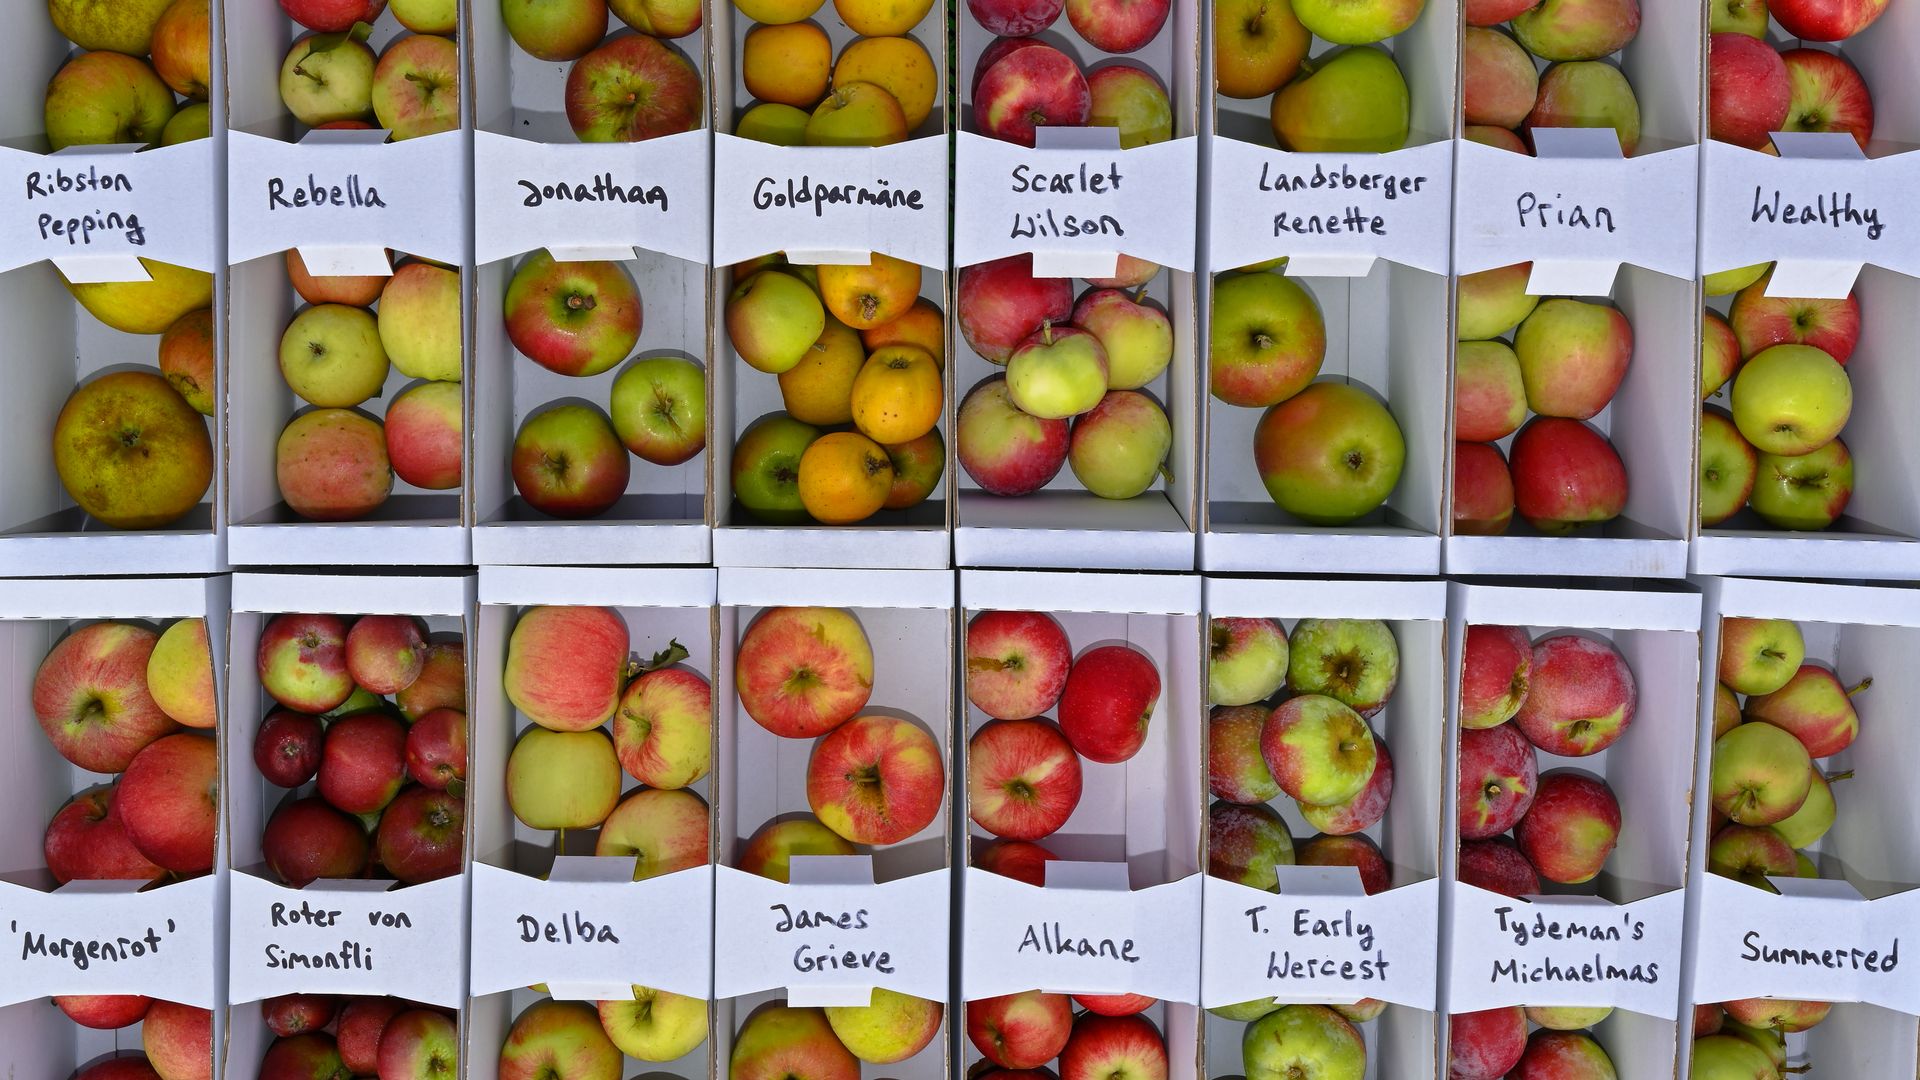 Different varieties of apples in boxes with labels